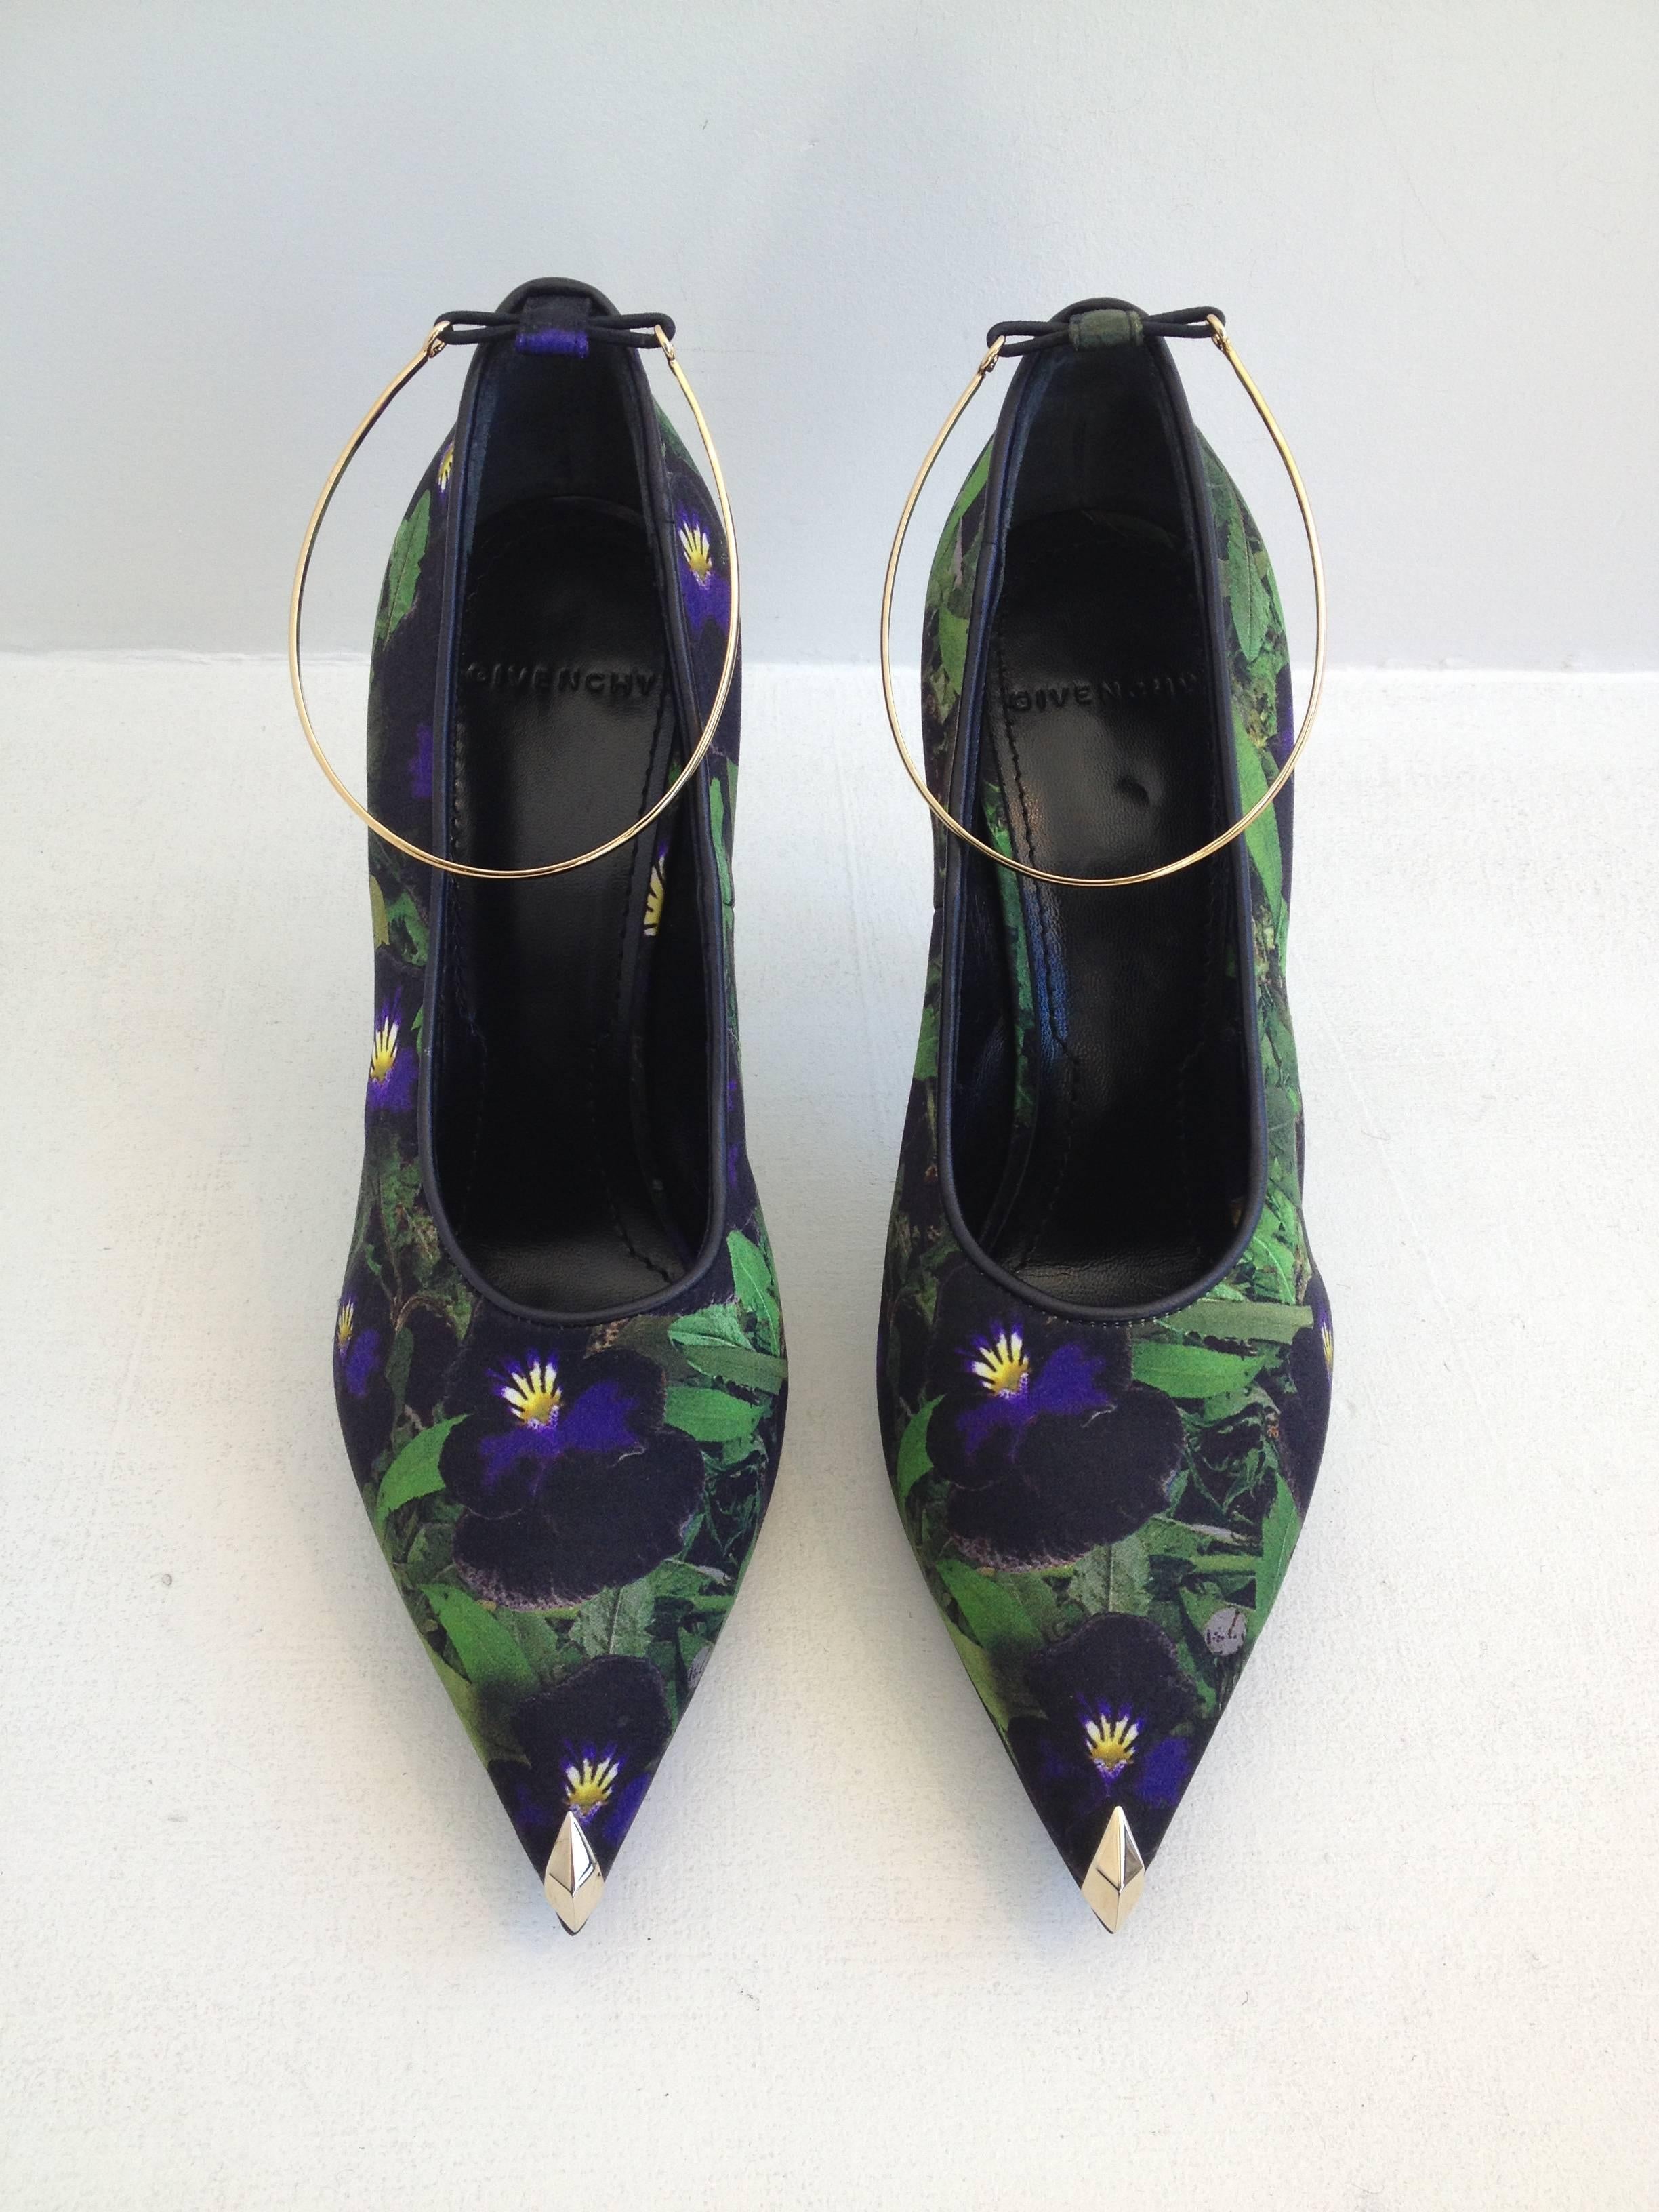 Elegant and unexpected - these Givenchy heels are just beautiful. The pointy toe is equipped with a small hidden .5 inch platform, while the body of the shoe is covered in a gorgeous black satin printed with a dark and mysterious nighttime foliage